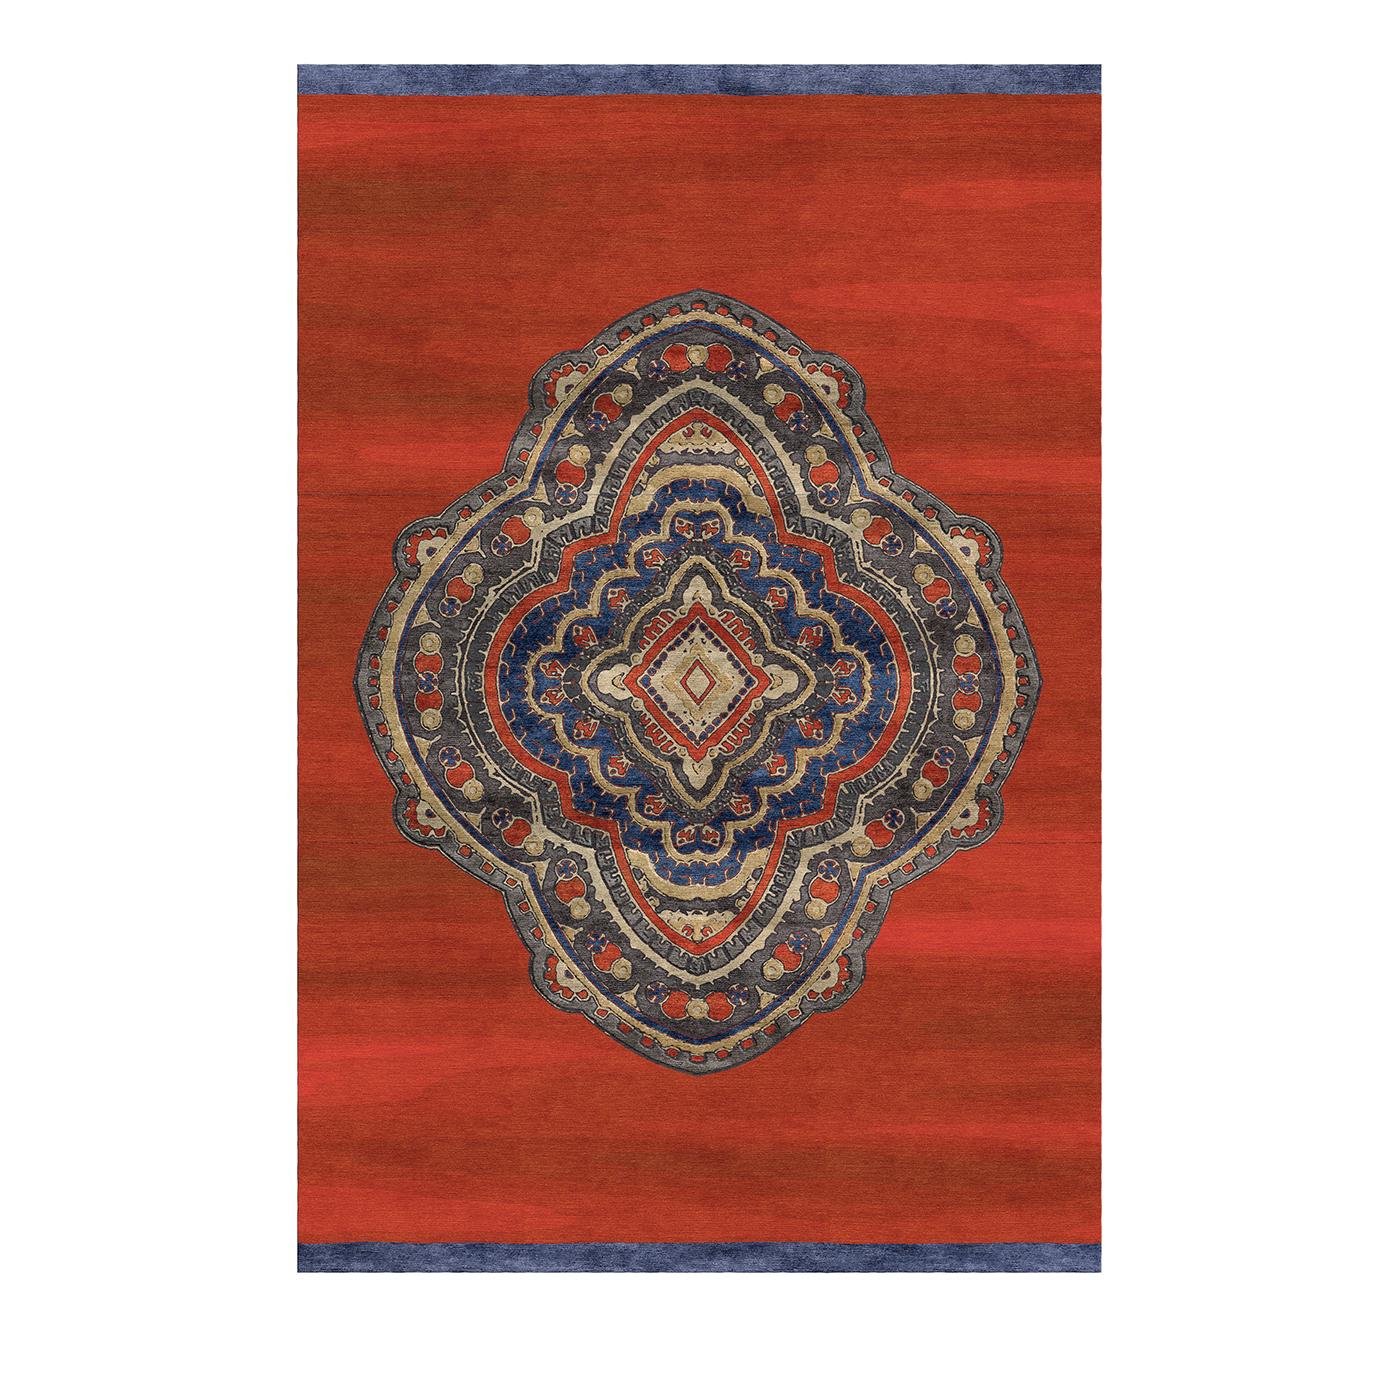 Inspired by Buddhist mandalas, this rug's sinuous, floral design evokes the dynamic images seen through a kaleidoscope. The intricate design is vibrantly colored, boasting deep crimson, pale blue, and warm beige. Set against a vivid red background,